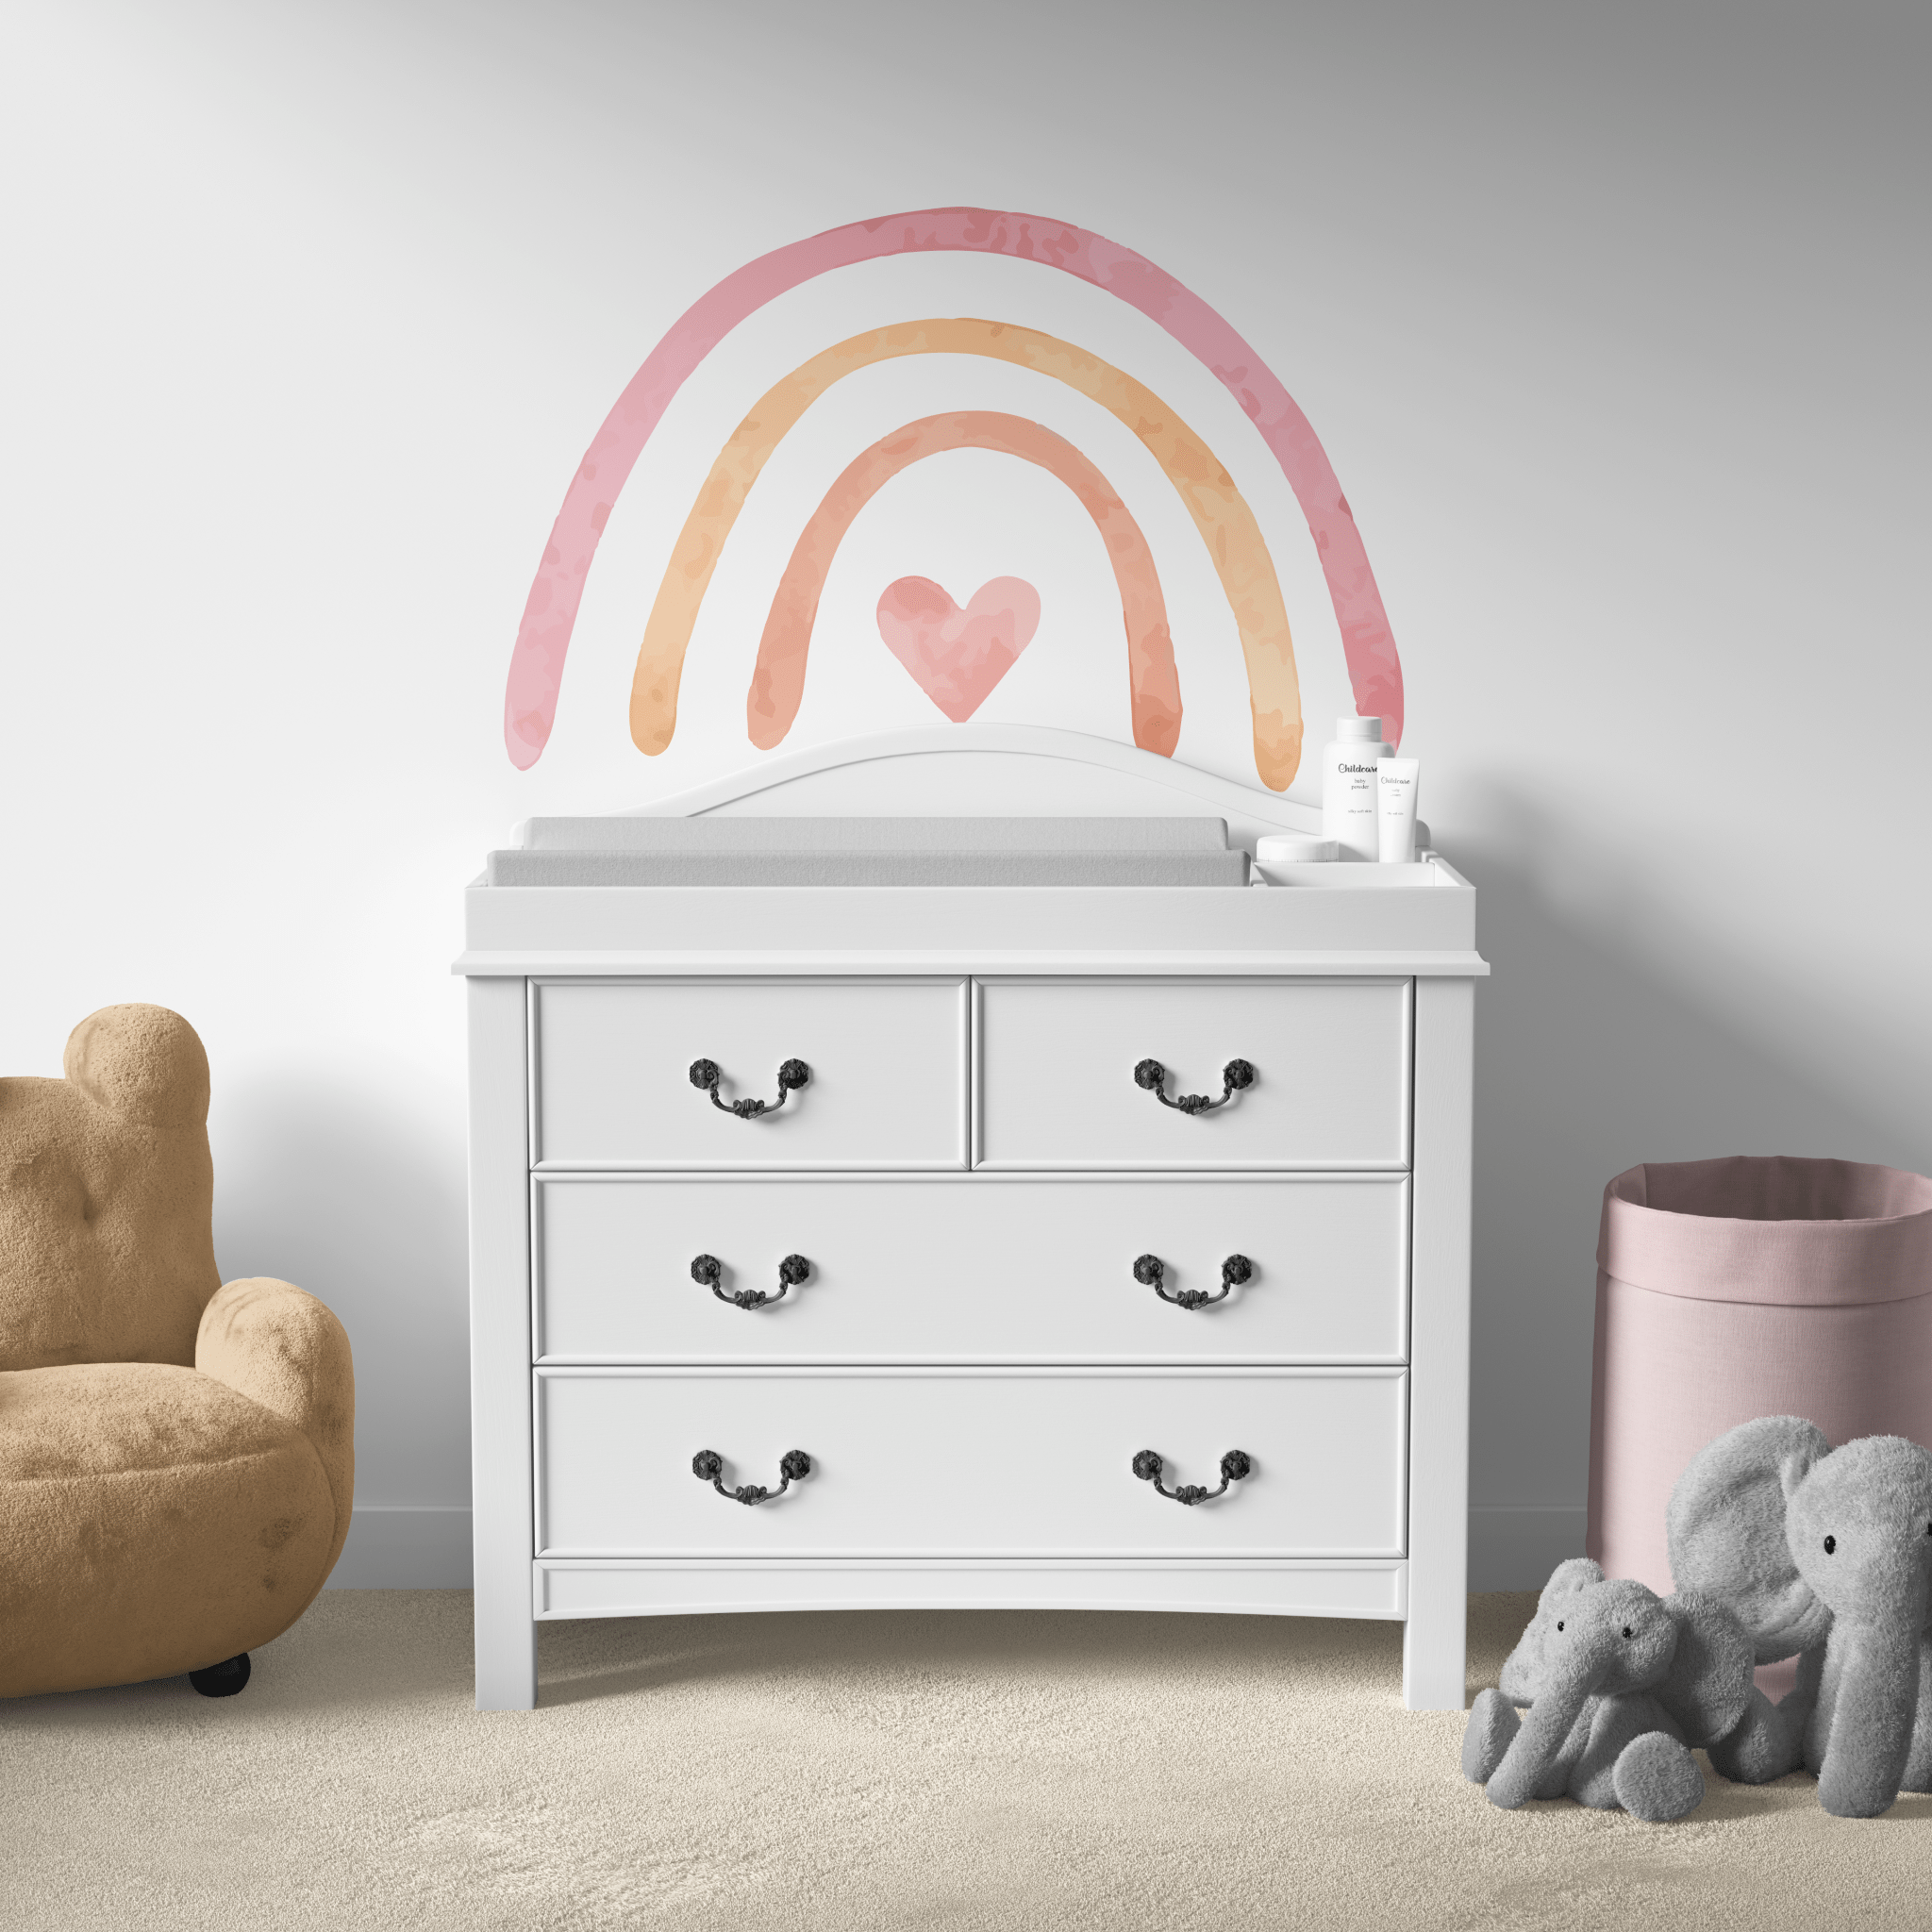 A simple and modern nursery setup with a pastel rainbow wall decal above a white changing table. The room includes a comfy brown chair, a soft elephant toy, and a pink storage bin, creating a gentle and relaxing atmosphere.